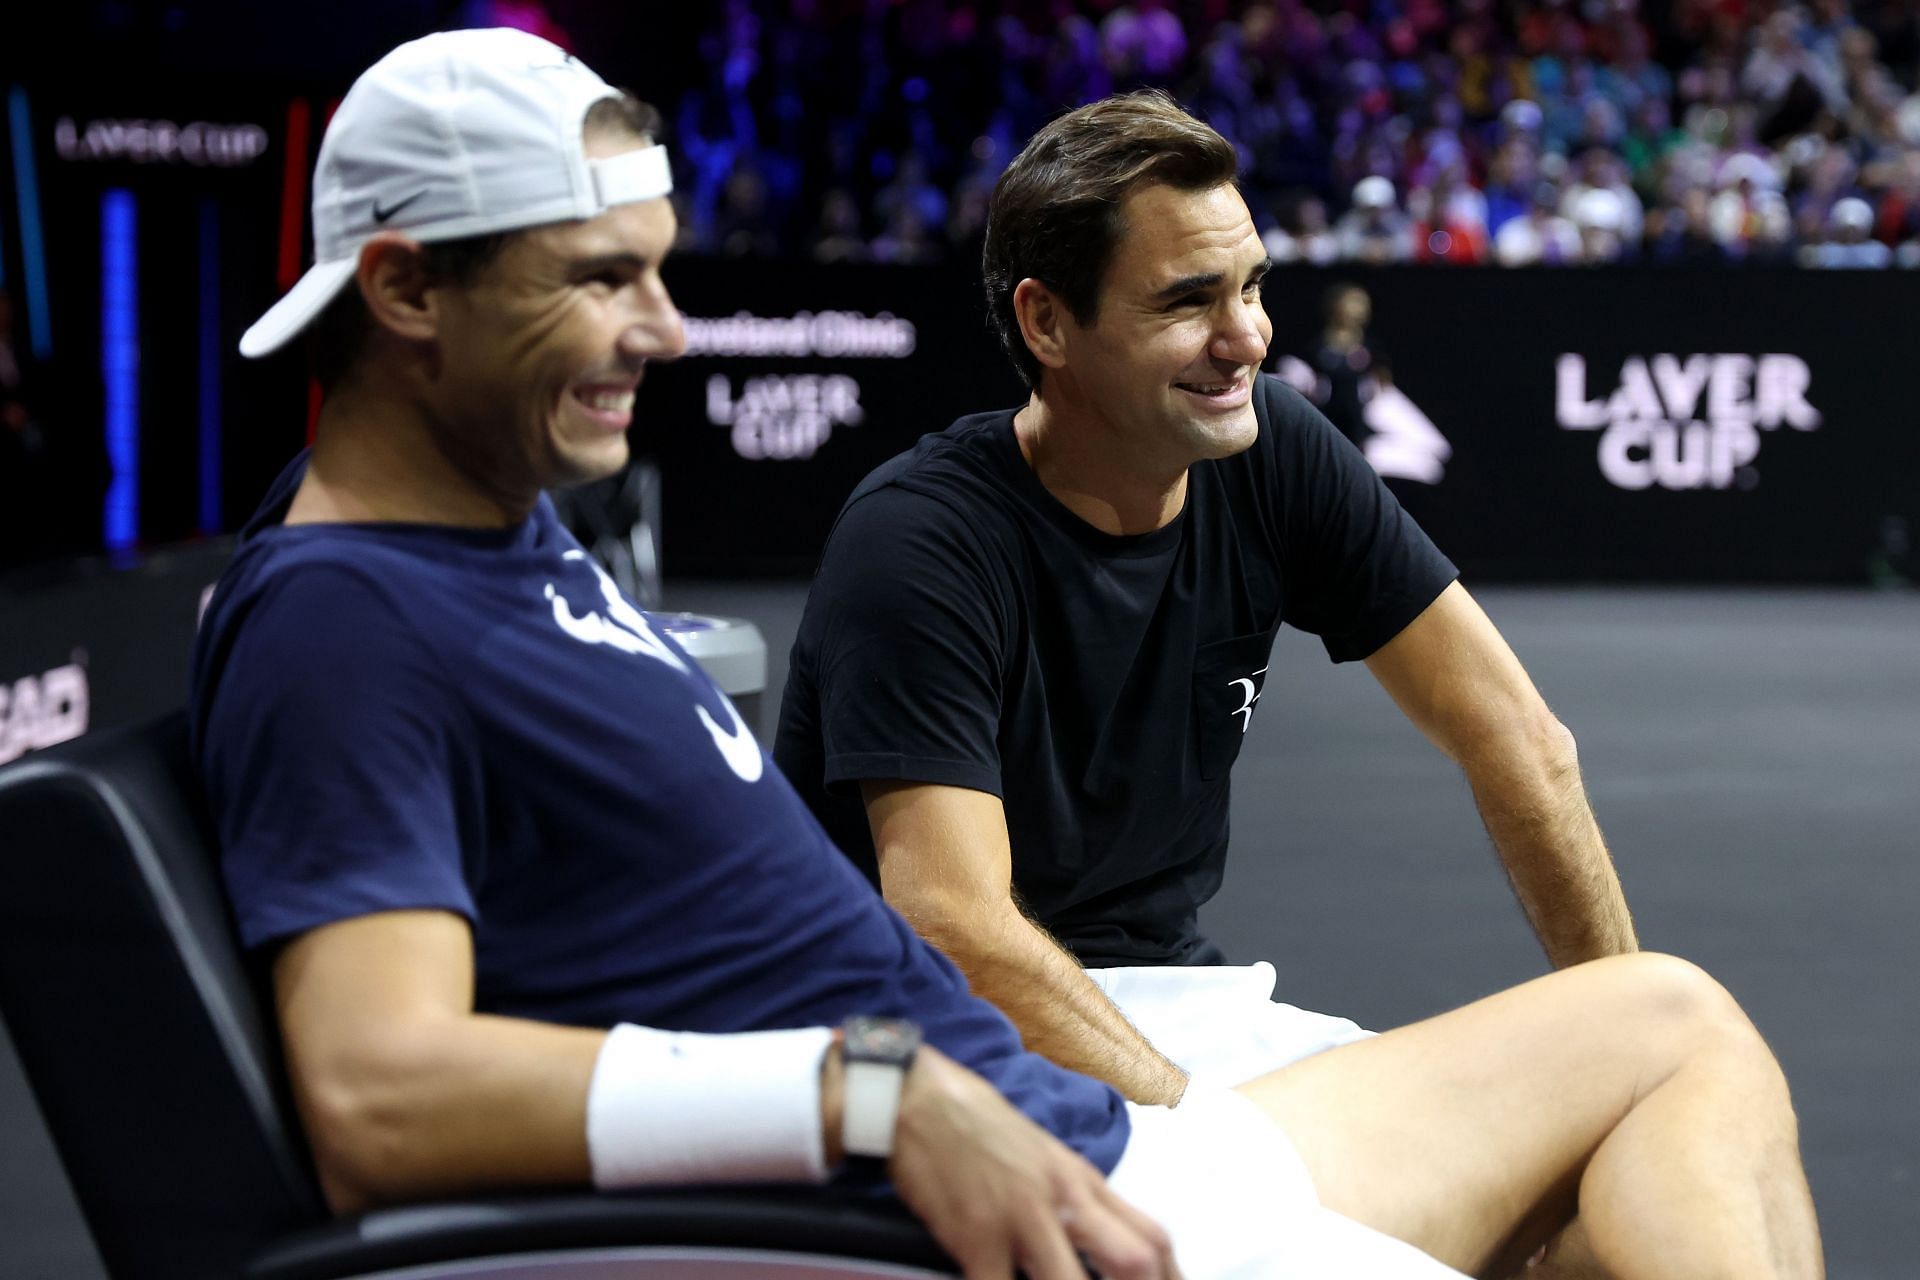 Rafael Nadal and Roger Federer at the 2022 Laver Cup